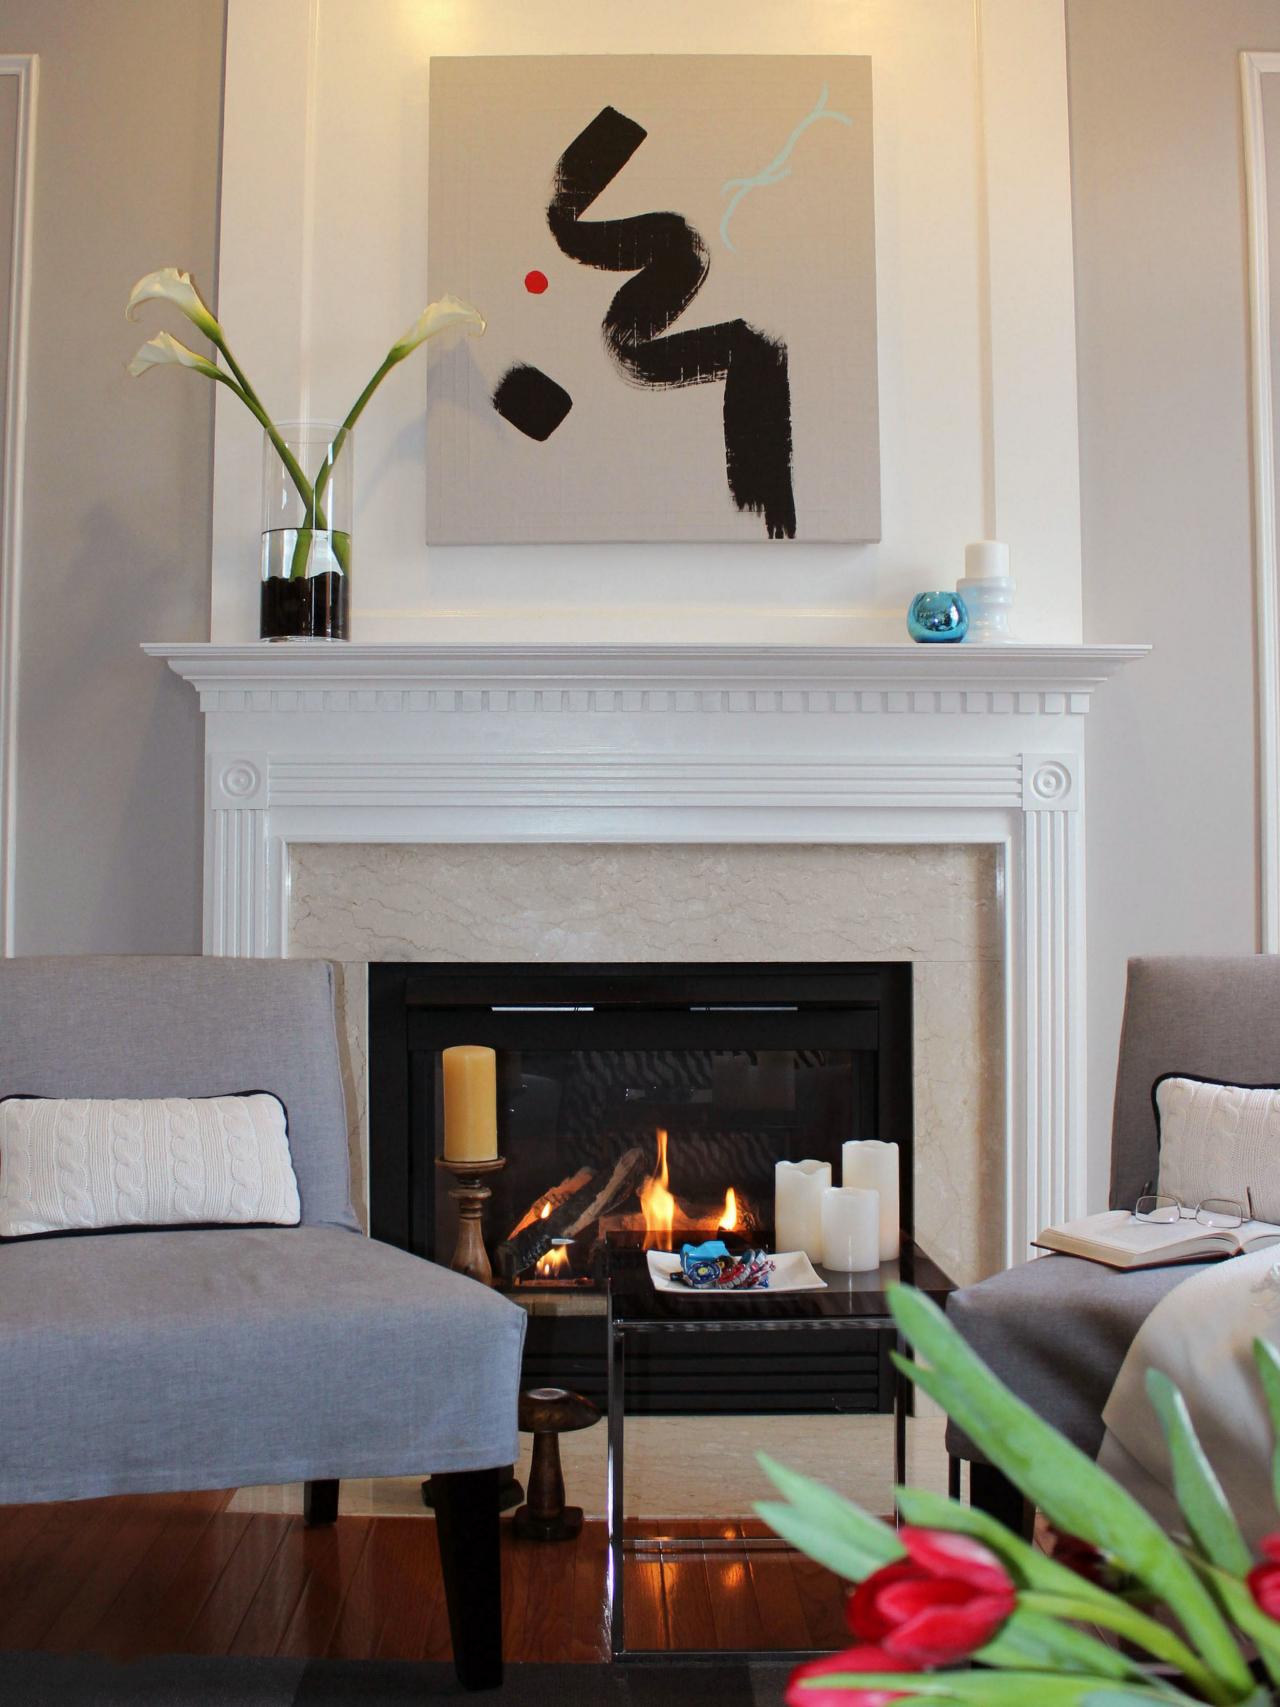 15 Ideas for Decorating Your Mantel Year Round | HGTV's ...